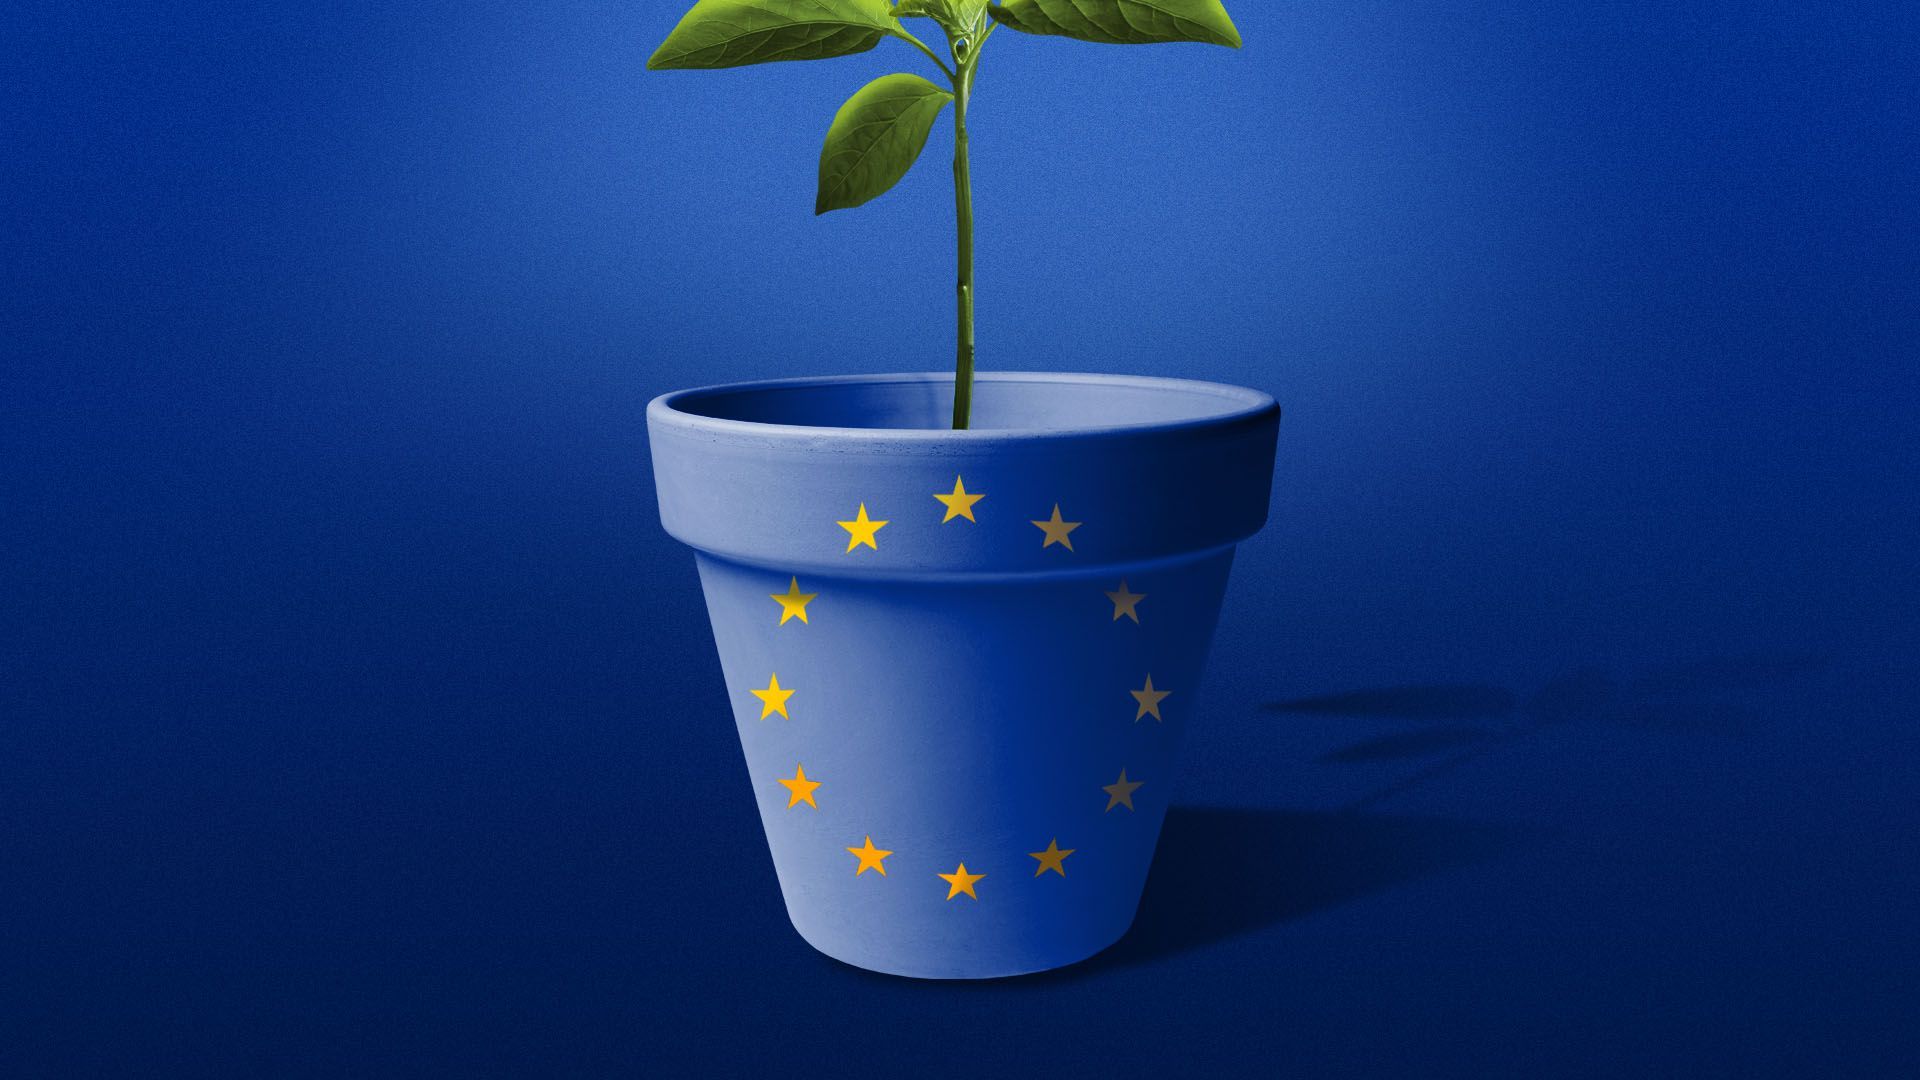 Illustration of a small plant growing in a pot with the EU flag on the front